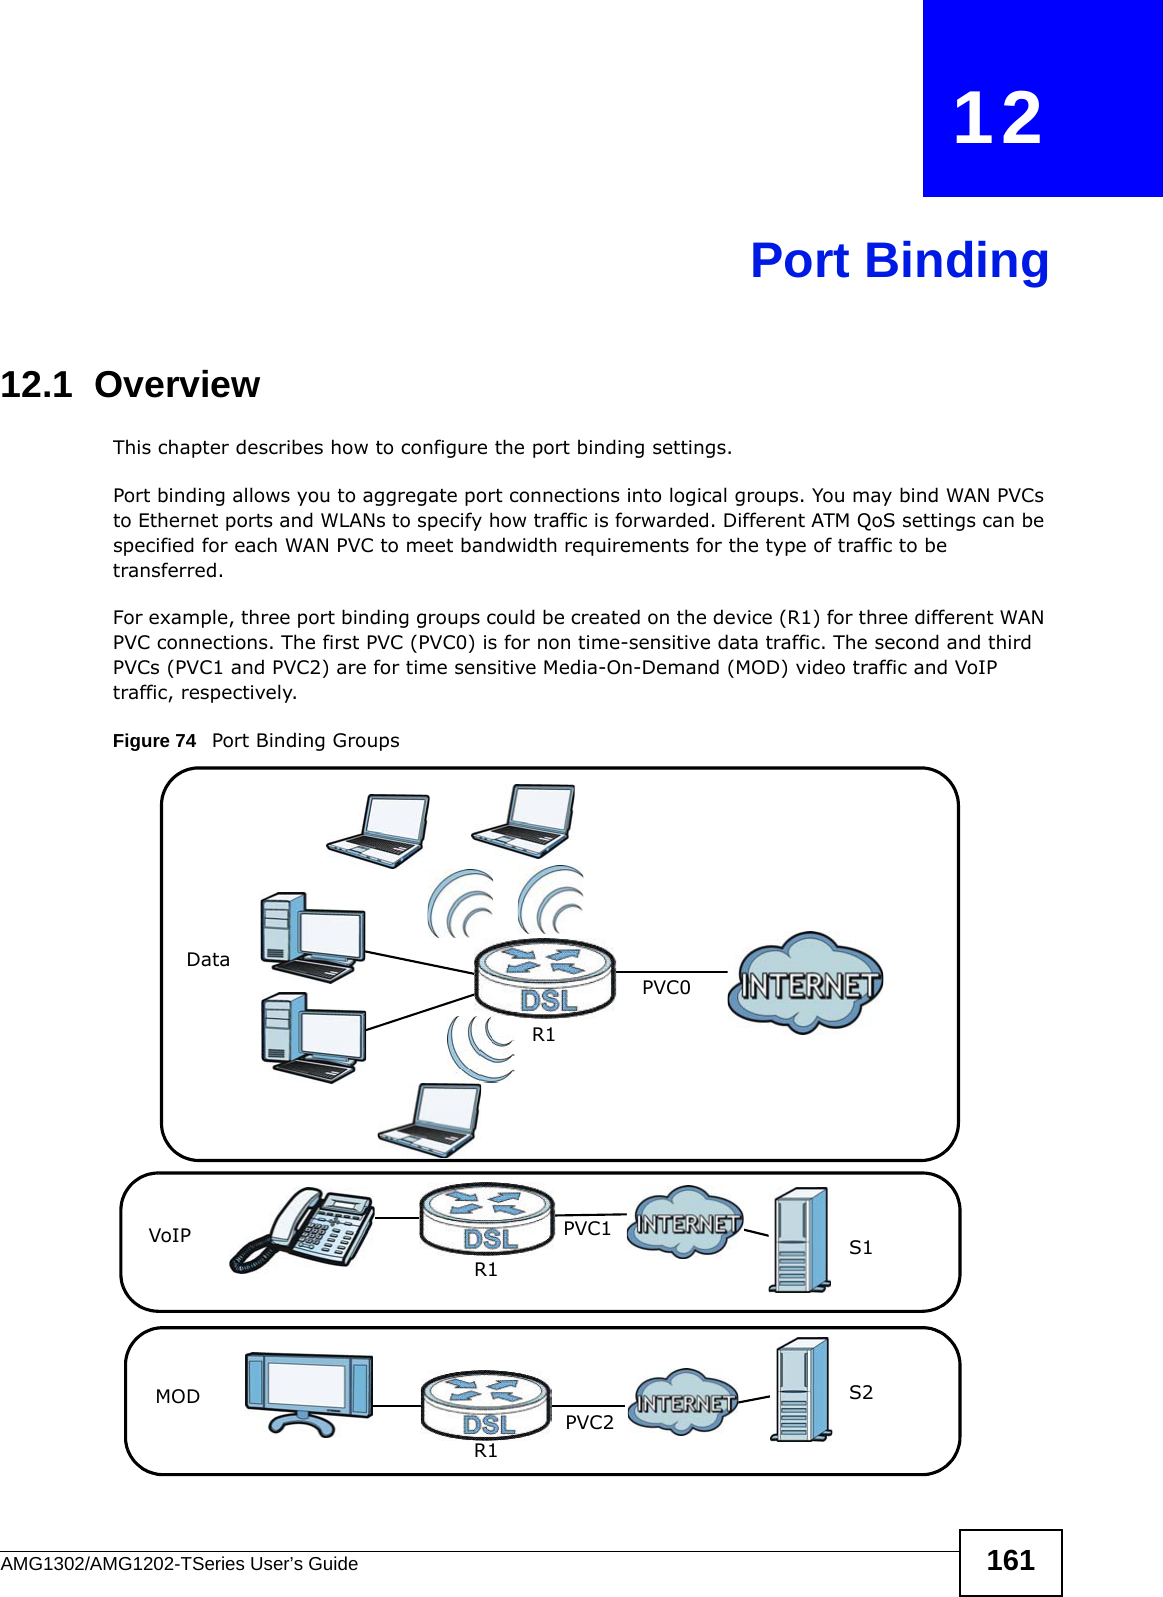 AMG1302/AMG1202-TSeries User’s Guide 161CHAPTER   12Port Binding12.1  OverviewThis chapter describes how to configure the port binding settings.Port binding allows you to aggregate port connections into logical groups. You may bind WAN PVCs to Ethernet ports and WLANs to specify how traffic is forwarded. Different ATM QoS settings can be specified for each WAN PVC to meet bandwidth requirements for the type of traffic to be transferred.For example, three port binding groups could be created on the device (R1) for three different WAN PVC connections. The first PVC (PVC0) is for non time-sensitive data traffic. The second and third PVCs (PVC1 and PVC2) are for time sensitive Media-On-Demand (MOD) video traffic and VoIP traffic, respectively.   Figure 74   Port Binding GroupsS2S1R1R1R1MODVoIPDataPVC0PVC2PVC1